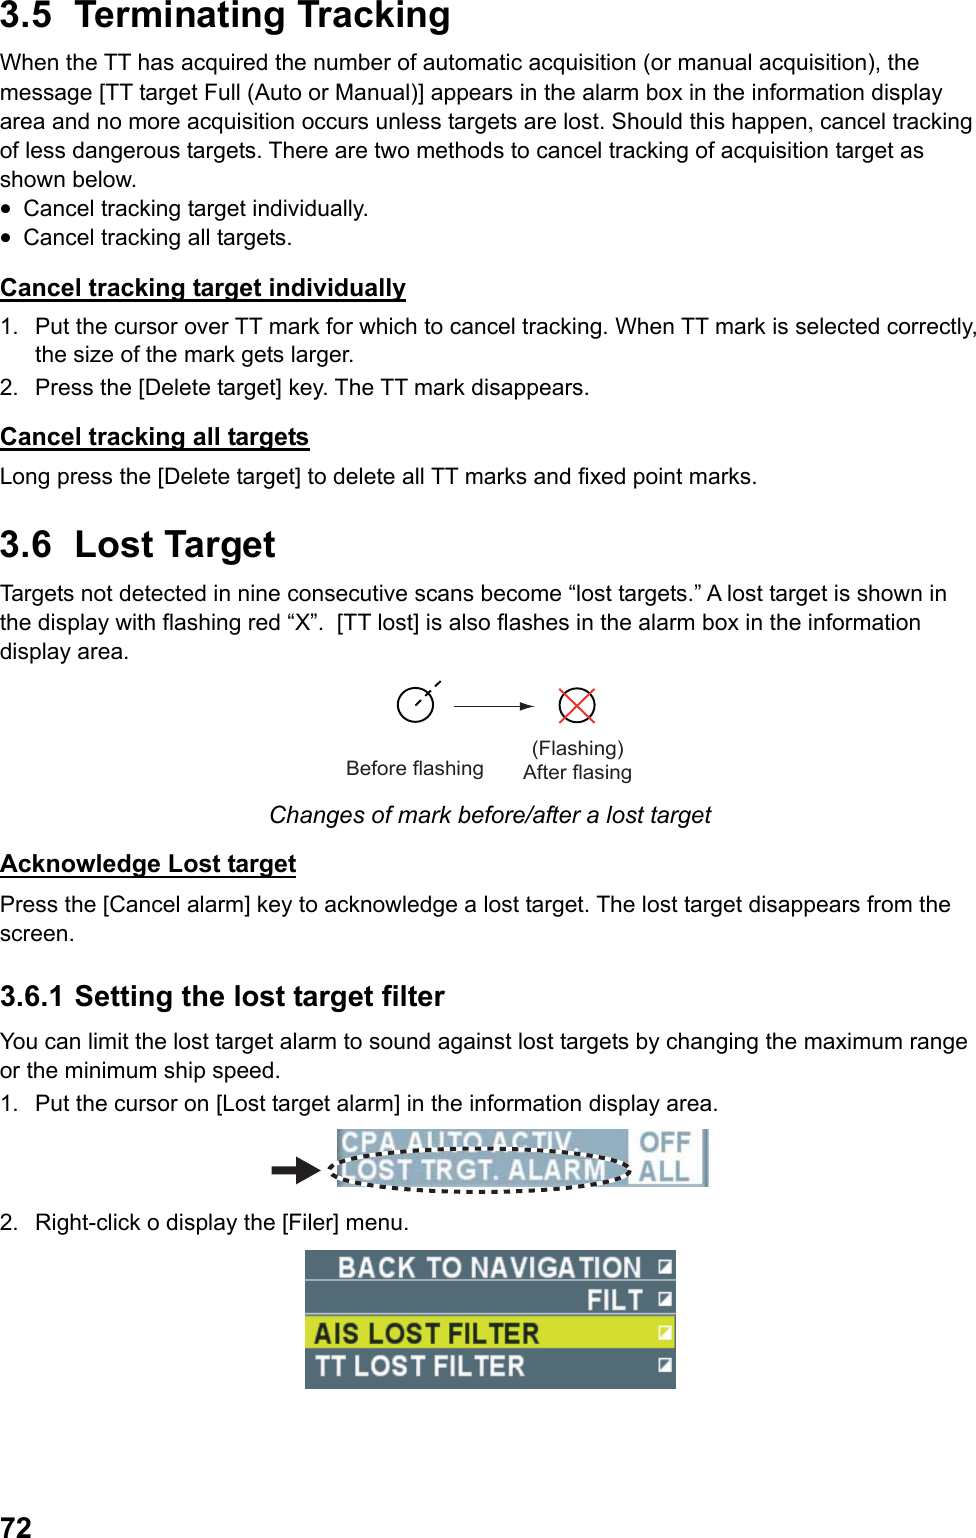  723.5 Terminating Tracking When the TT has acquired the number of automatic acquisition (or manual acquisition), the message [TT target Full (Auto or Manual)] appears in the alarm box in the information display area and no more acquisition occurs unless targets are lost. Should this happen, cancel tracking of less dangerous targets. There are two methods to cancel tracking of acquisition target as shown below. •  Cancel tracking target individually. •  Cancel tracking all targets. Cancel tracking target individually 1.  Put the cursor over TT mark for which to cancel tracking. When TT mark is selected correctly, the size of the mark gets larger. 2.  Press the [Delete target] key. The TT mark disappears. Cancel tracking all targets Long press the [Delete target] to delete all TT marks and fixed point marks. 3.6 Lost Target Targets not detected in nine consecutive scans become “lost targets.” A lost target is shown in the display with flashing red “X”.  [TT lost] is also flashes in the alarm box in the information display area. Before flashing(Flashing) After flasing Changes of mark before/after a lost target Acknowledge Lost target Press the [Cancel alarm] key to acknowledge a lost target. The lost target disappears from the screen. 3.6.1 Setting the lost target filter You can limit the lost target alarm to sound against lost targets by changing the maximum range or the minimum ship speed. 1.  Put the cursor on [Lost target alarm] in the information display area.  2.  Right-click o display the [Filer] menu.  